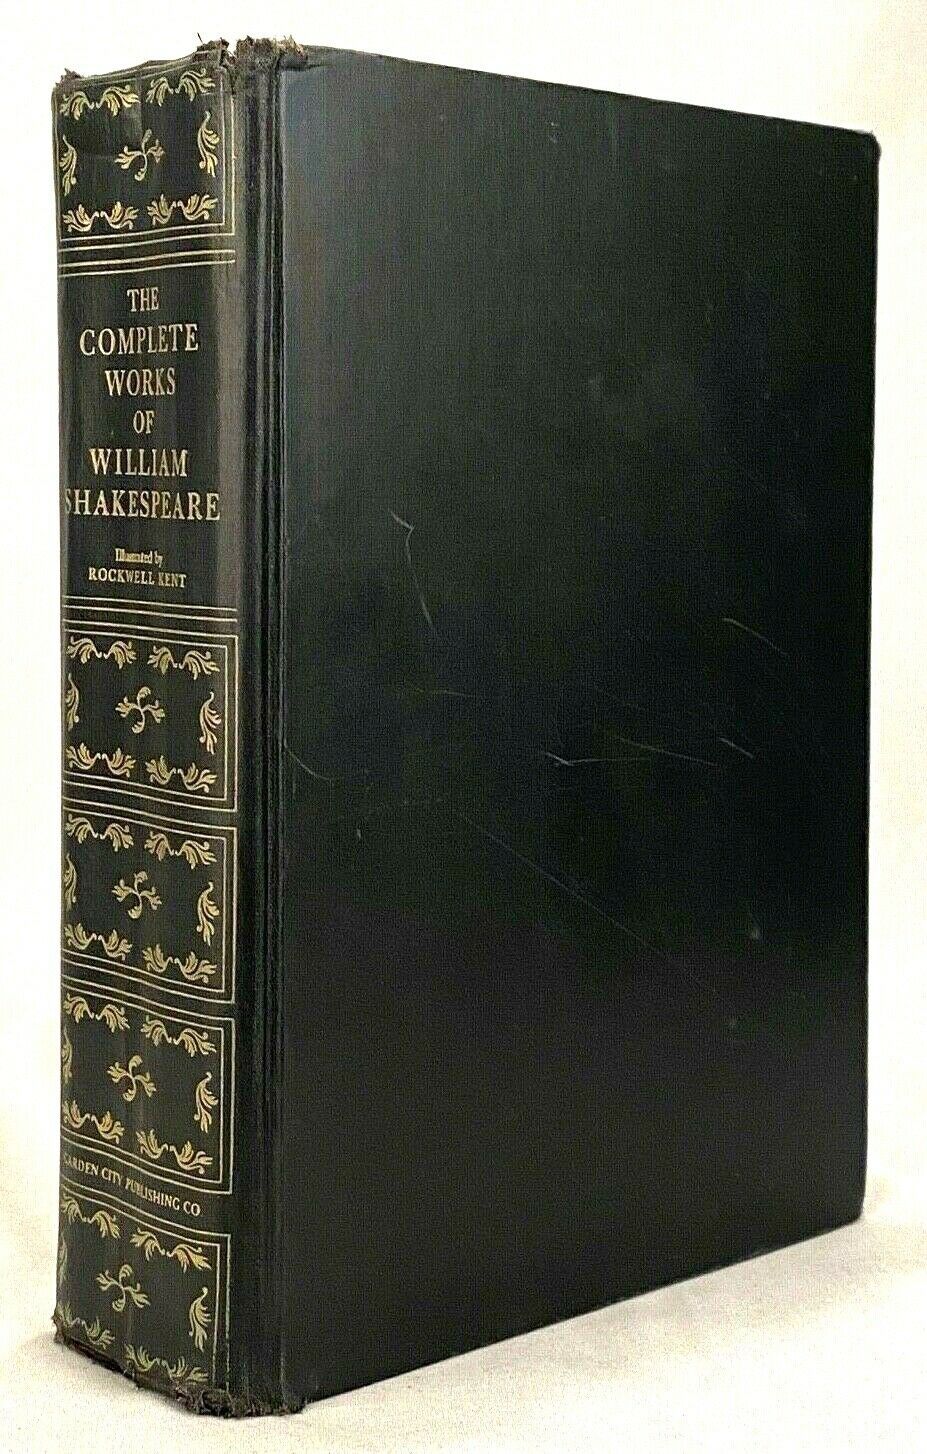 the complete works of shakespeare book buy